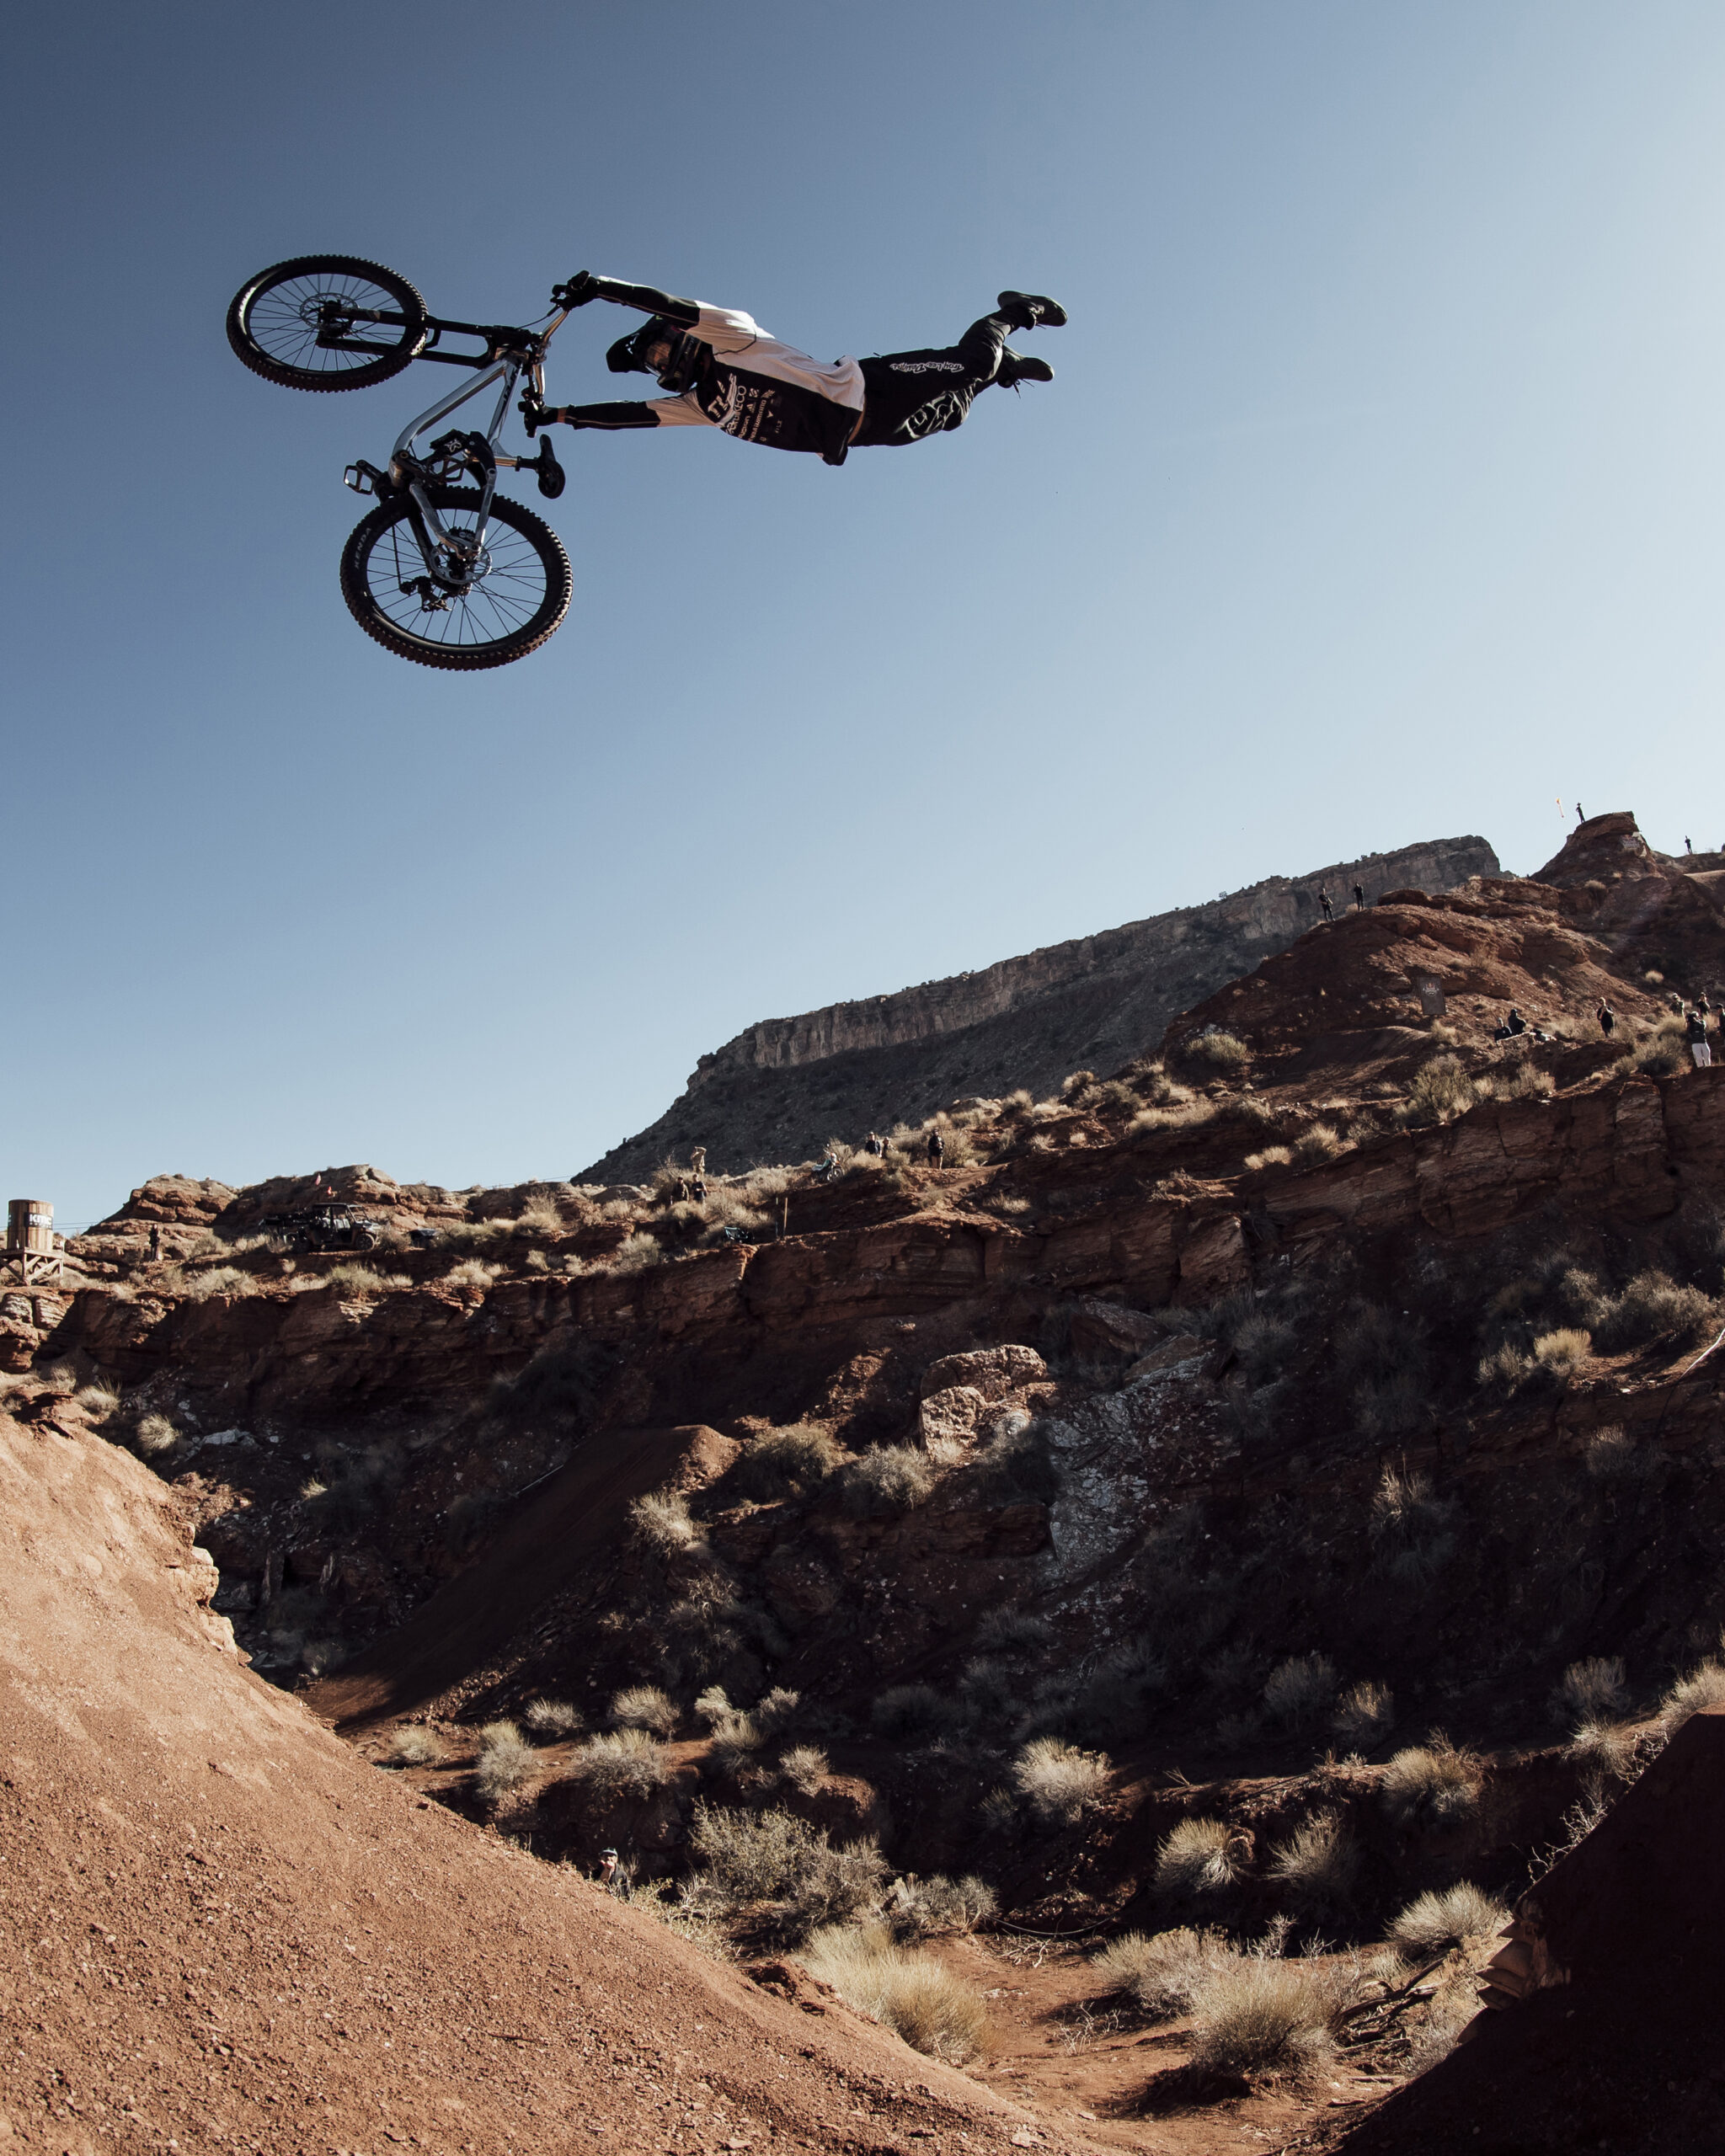 Tom Van Steenbergen performs at Red Bull Rampage in Virgin, Utah USA on October 14, 2021 // SI202110150061 // Usage for editorial use only //